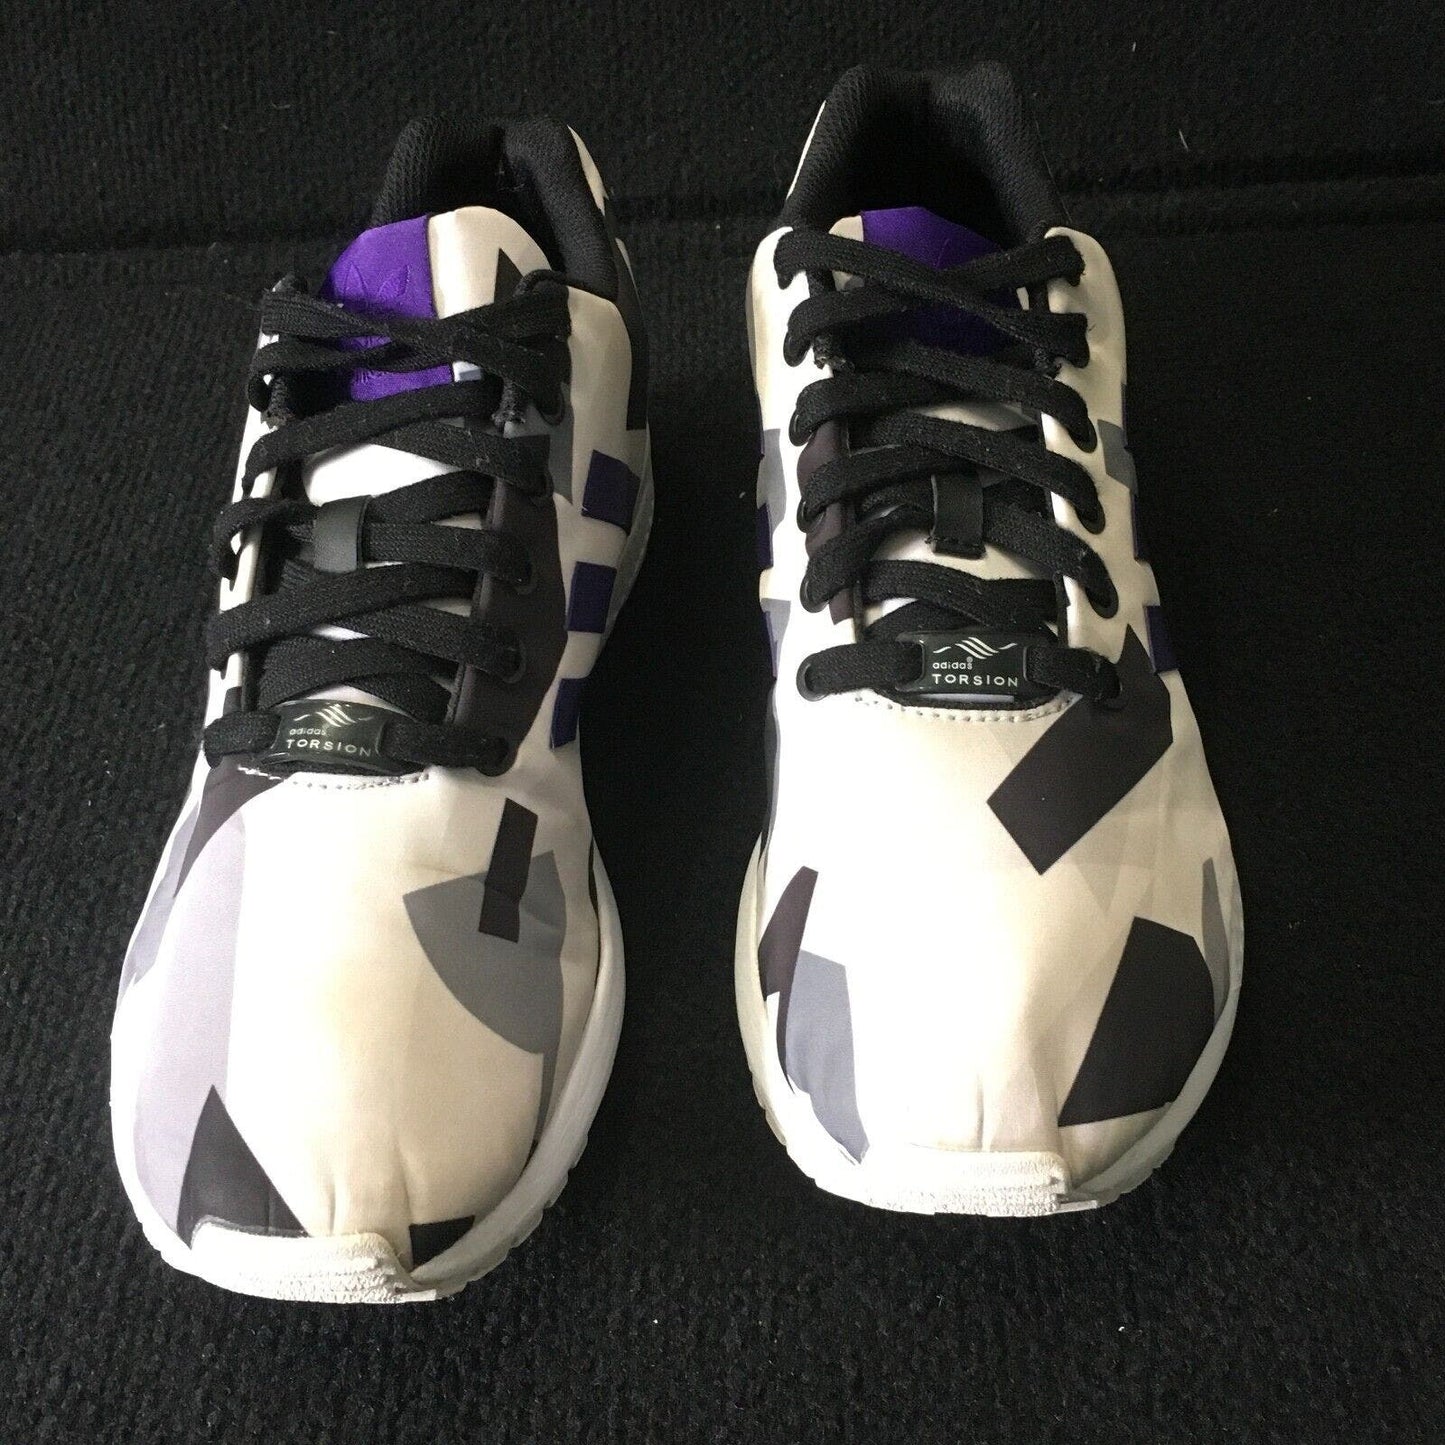 Adidas Mens ZX Flux B34517 White Purple Lace Up Low Top Running Shoes Size 8.5